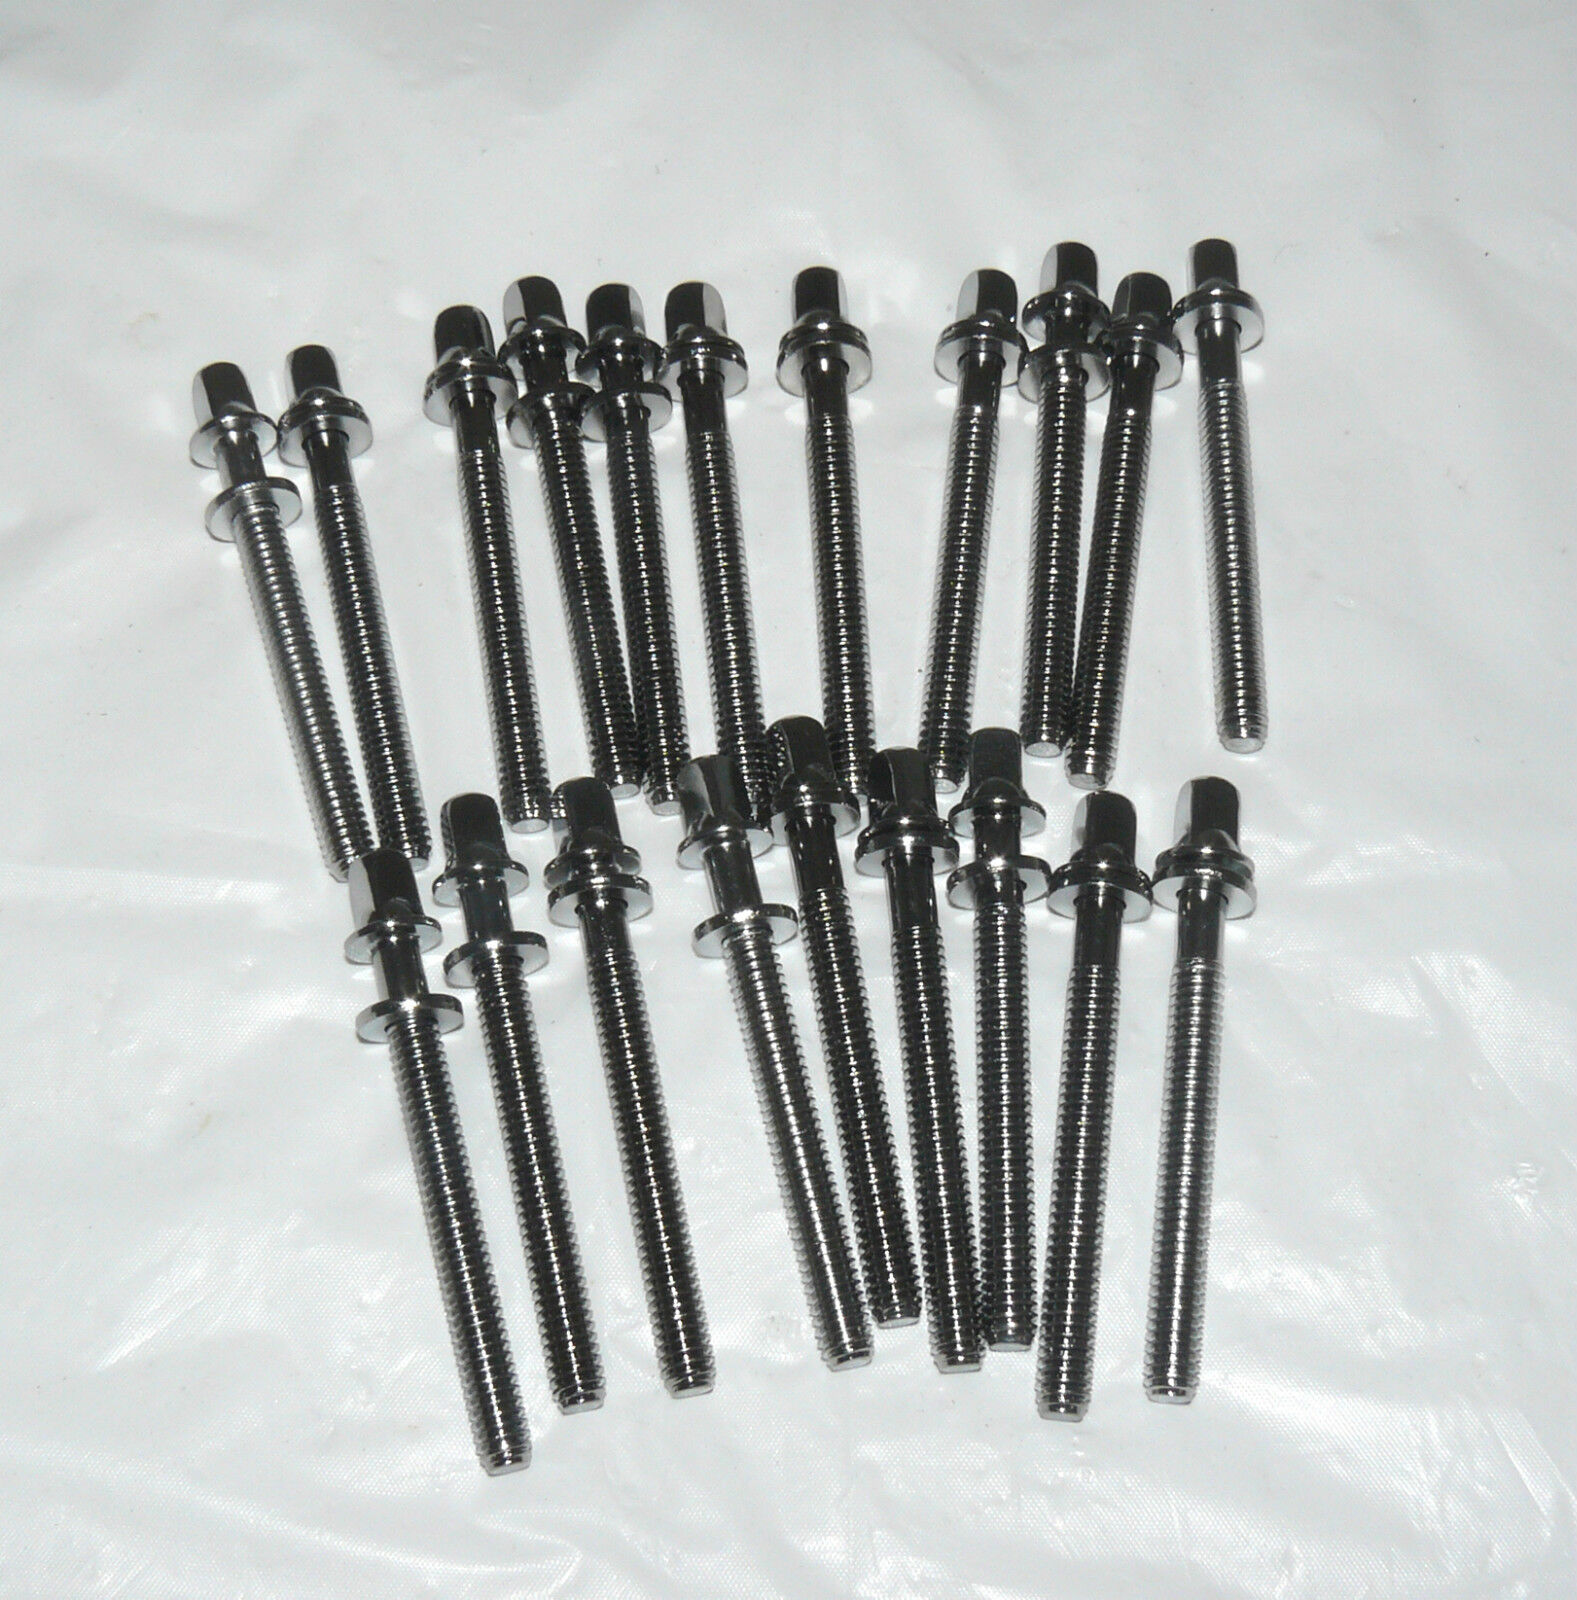 20 NEW Chrome Drum Tension Rods 52mm/2